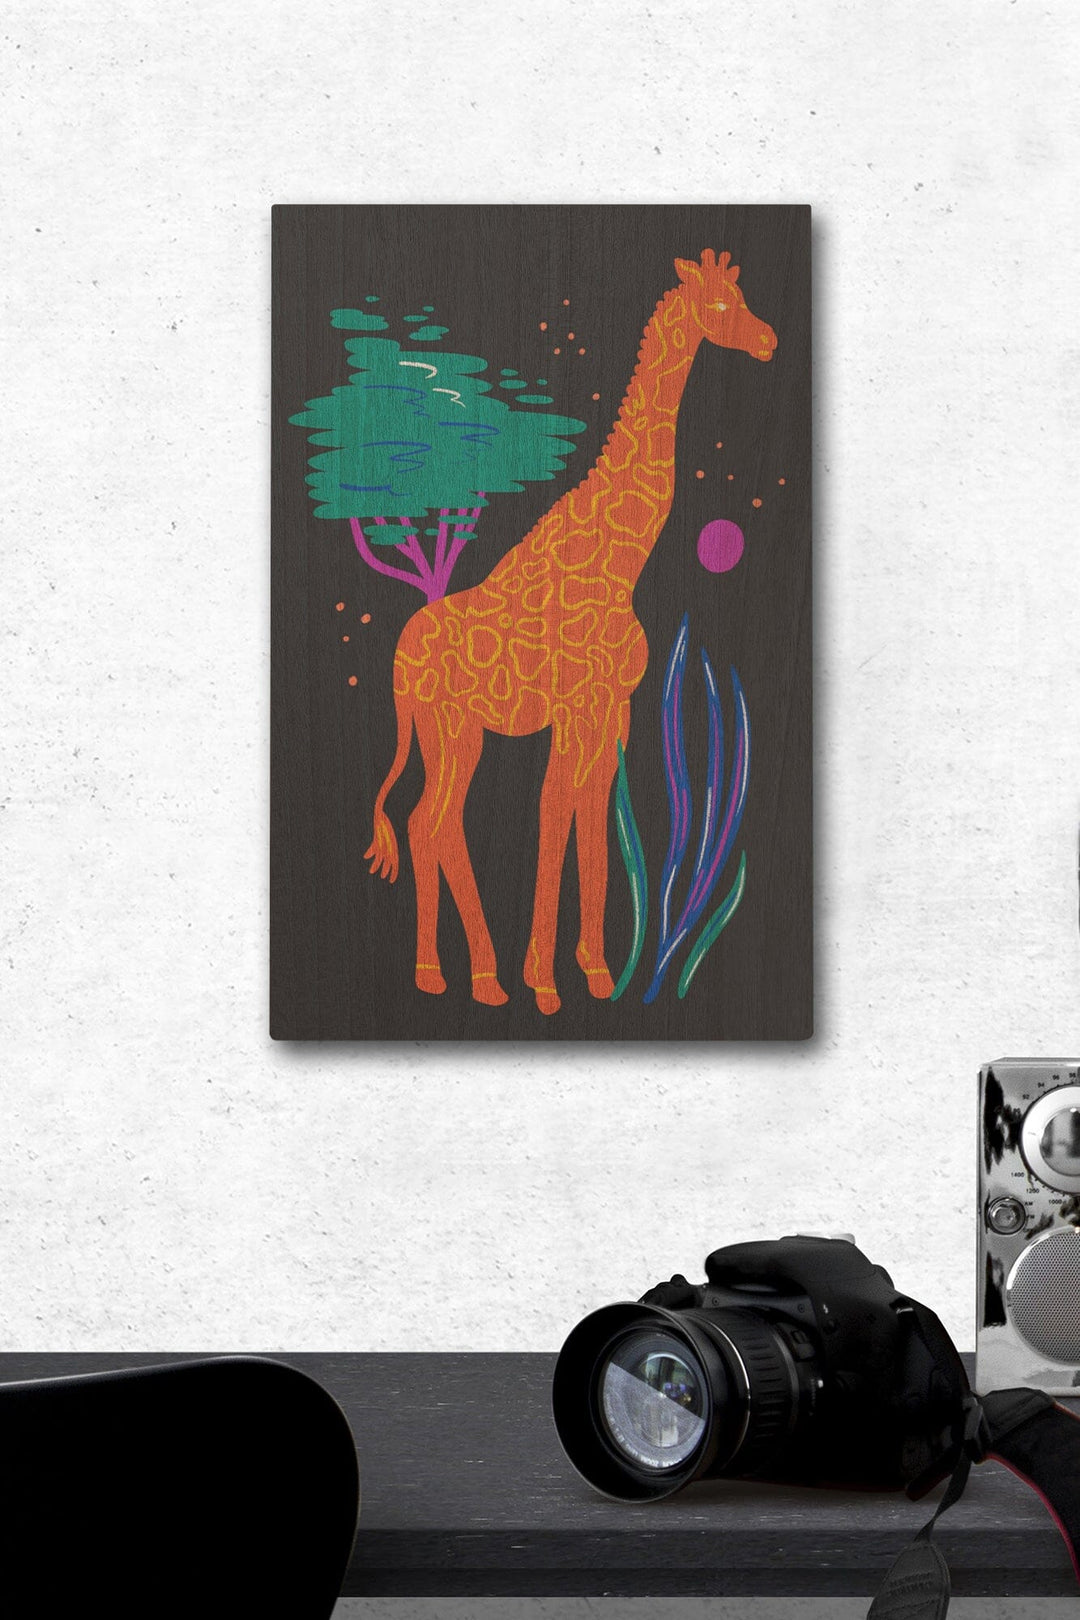 Lush Environment Collection, Giraffe, Wood Signs and Postcards Wood Lantern Press 12 x 18 Wood Gallery Print 